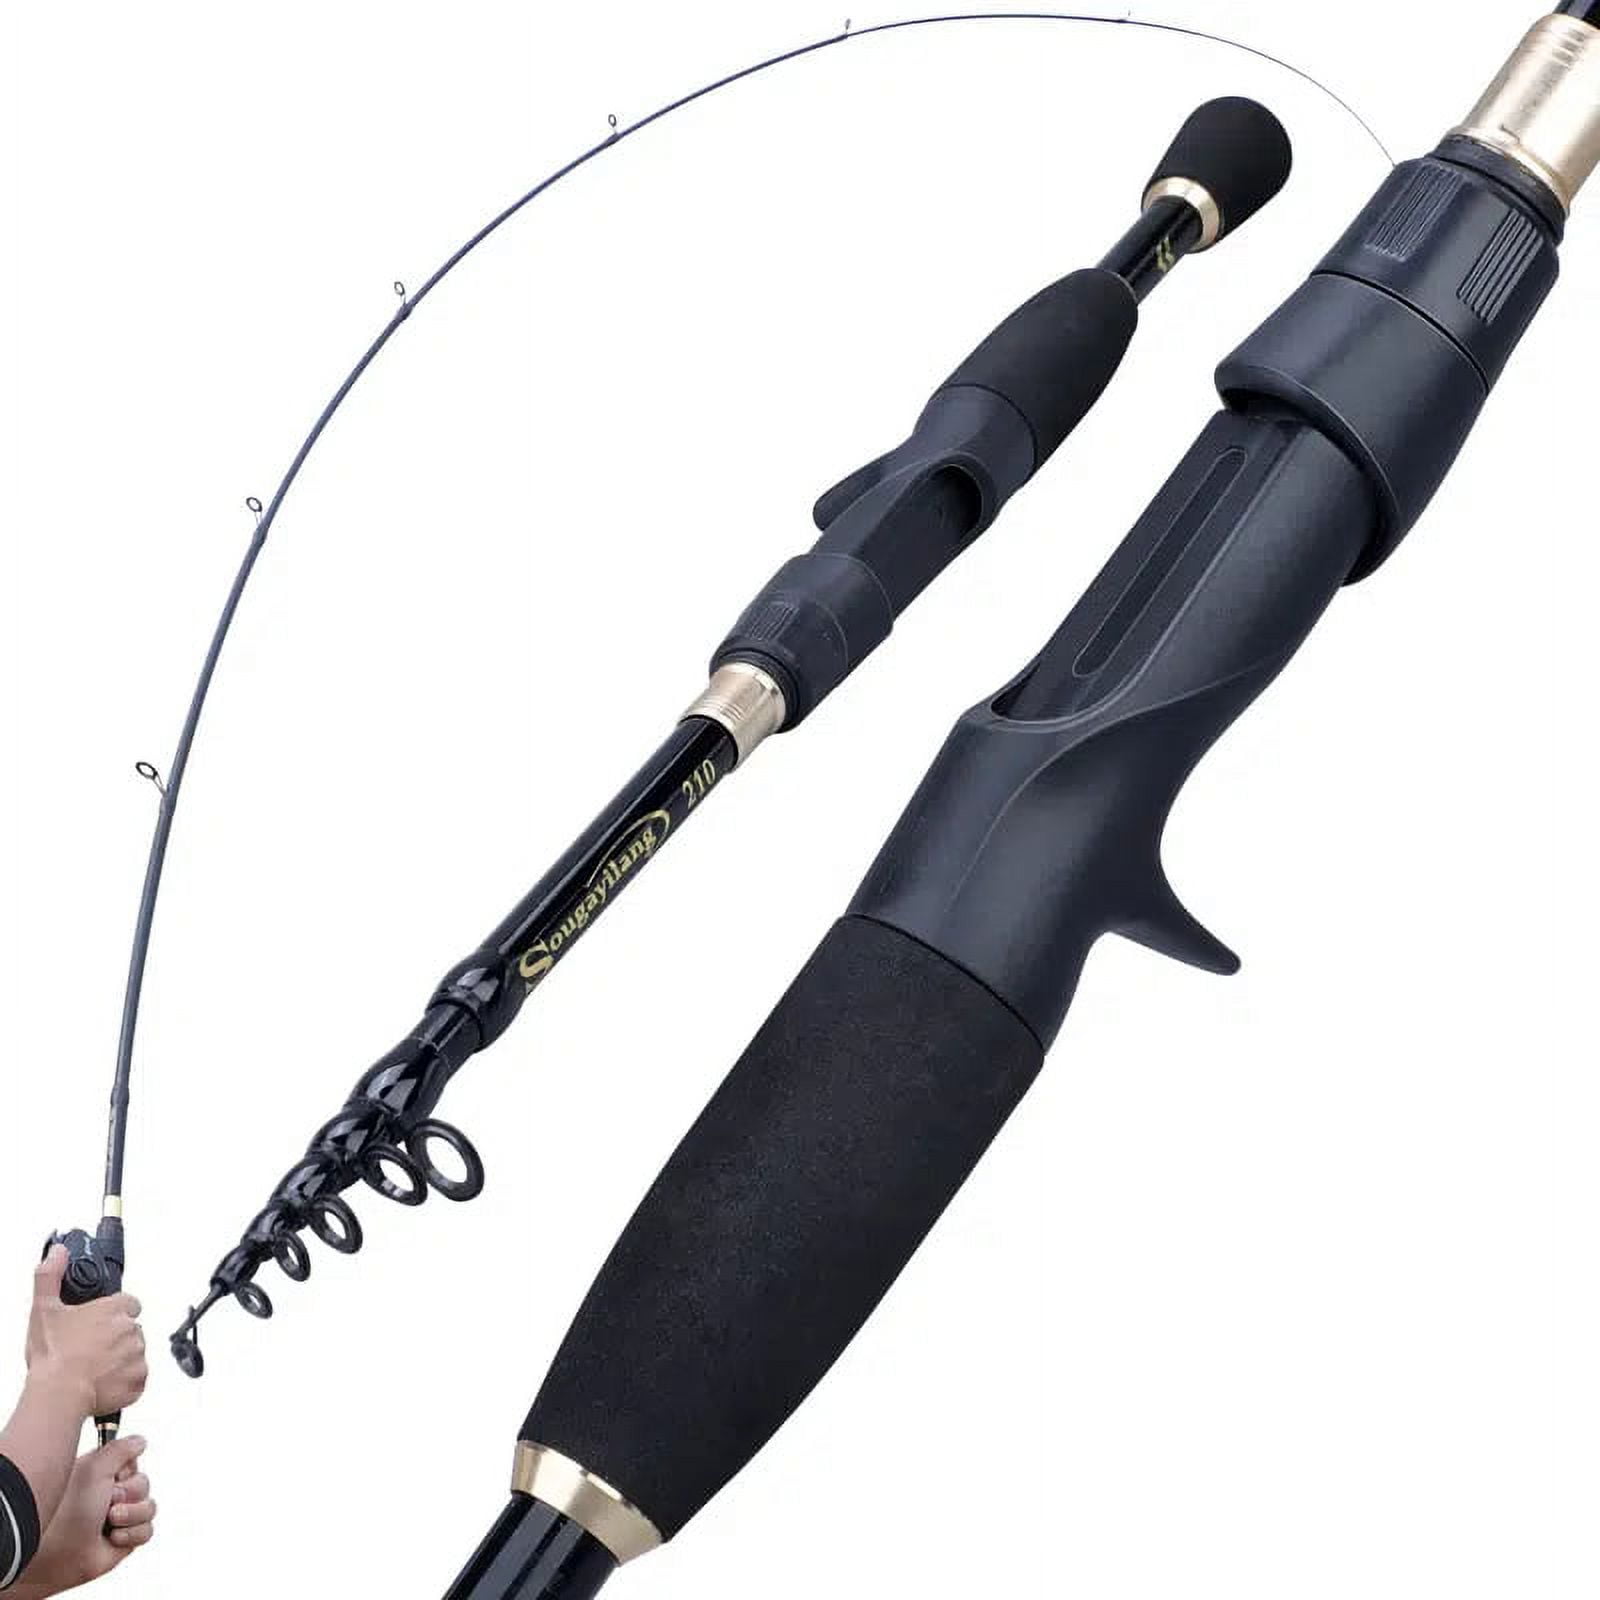 Telescopic Fishing Rod, 24T Carbon Casting/Spinning Travel Fishing Pole, Portable  Fishing Rod, Collapsible Rod 6'~8', Saltwater Freshwater, Fishing Gift for  Men 